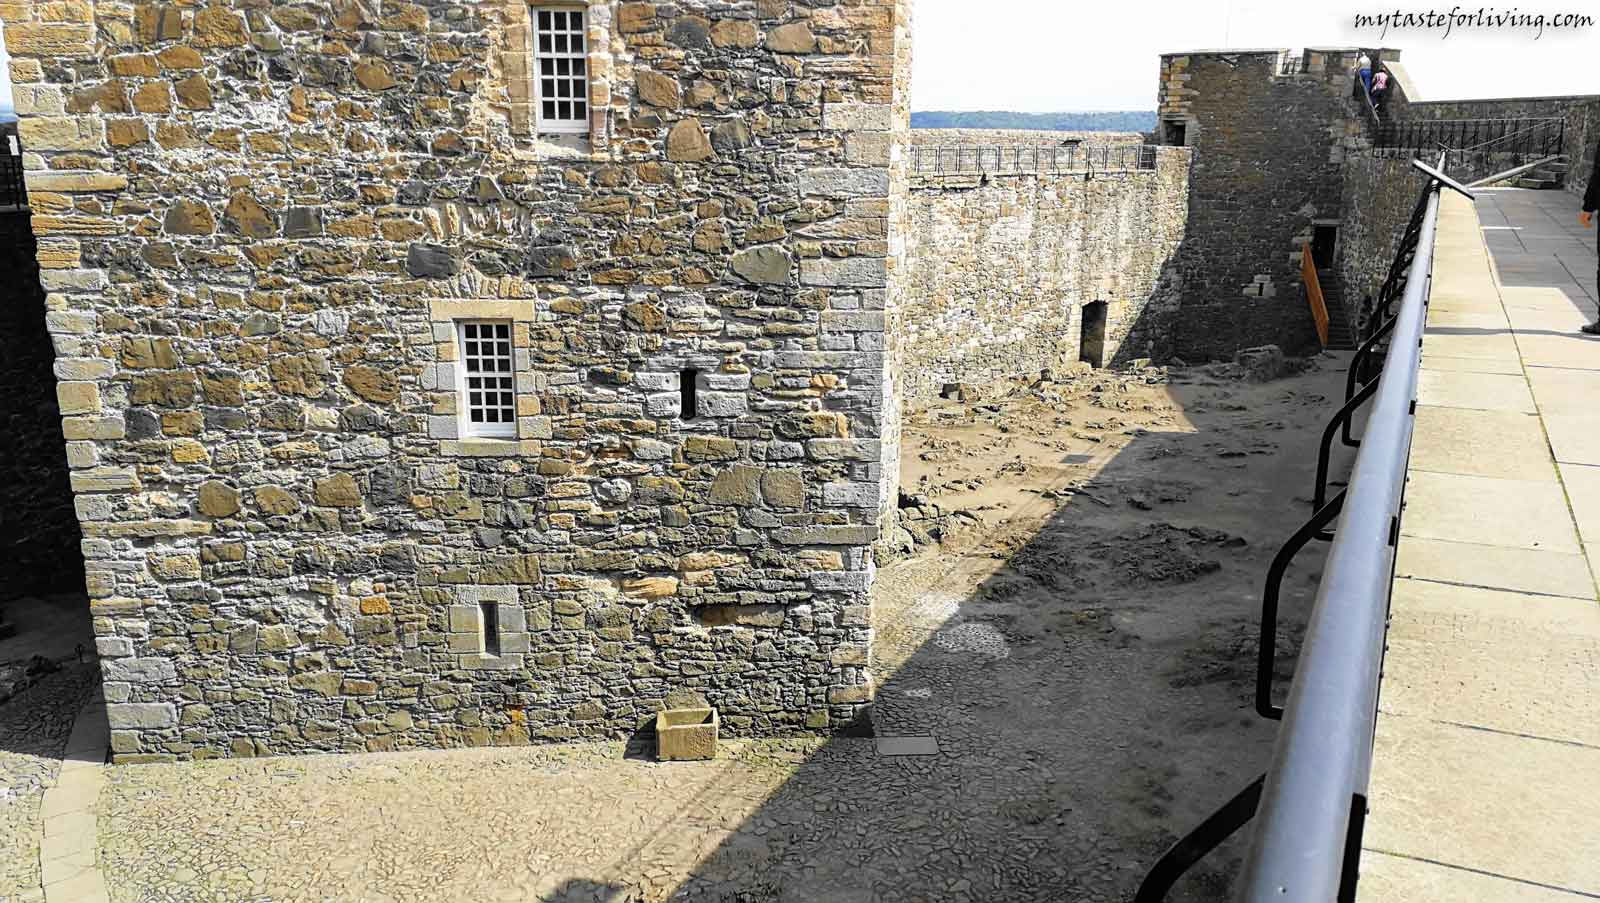 Blackness Castle is a 15th-century fortress near the village of Blackness, Scotland, located on the south bank of the Firth of Forth. It was used for the film location of the series "Outlander" under the name Fort William, where the main character Jamie Fraser was whipped by the Black Jack Randall.